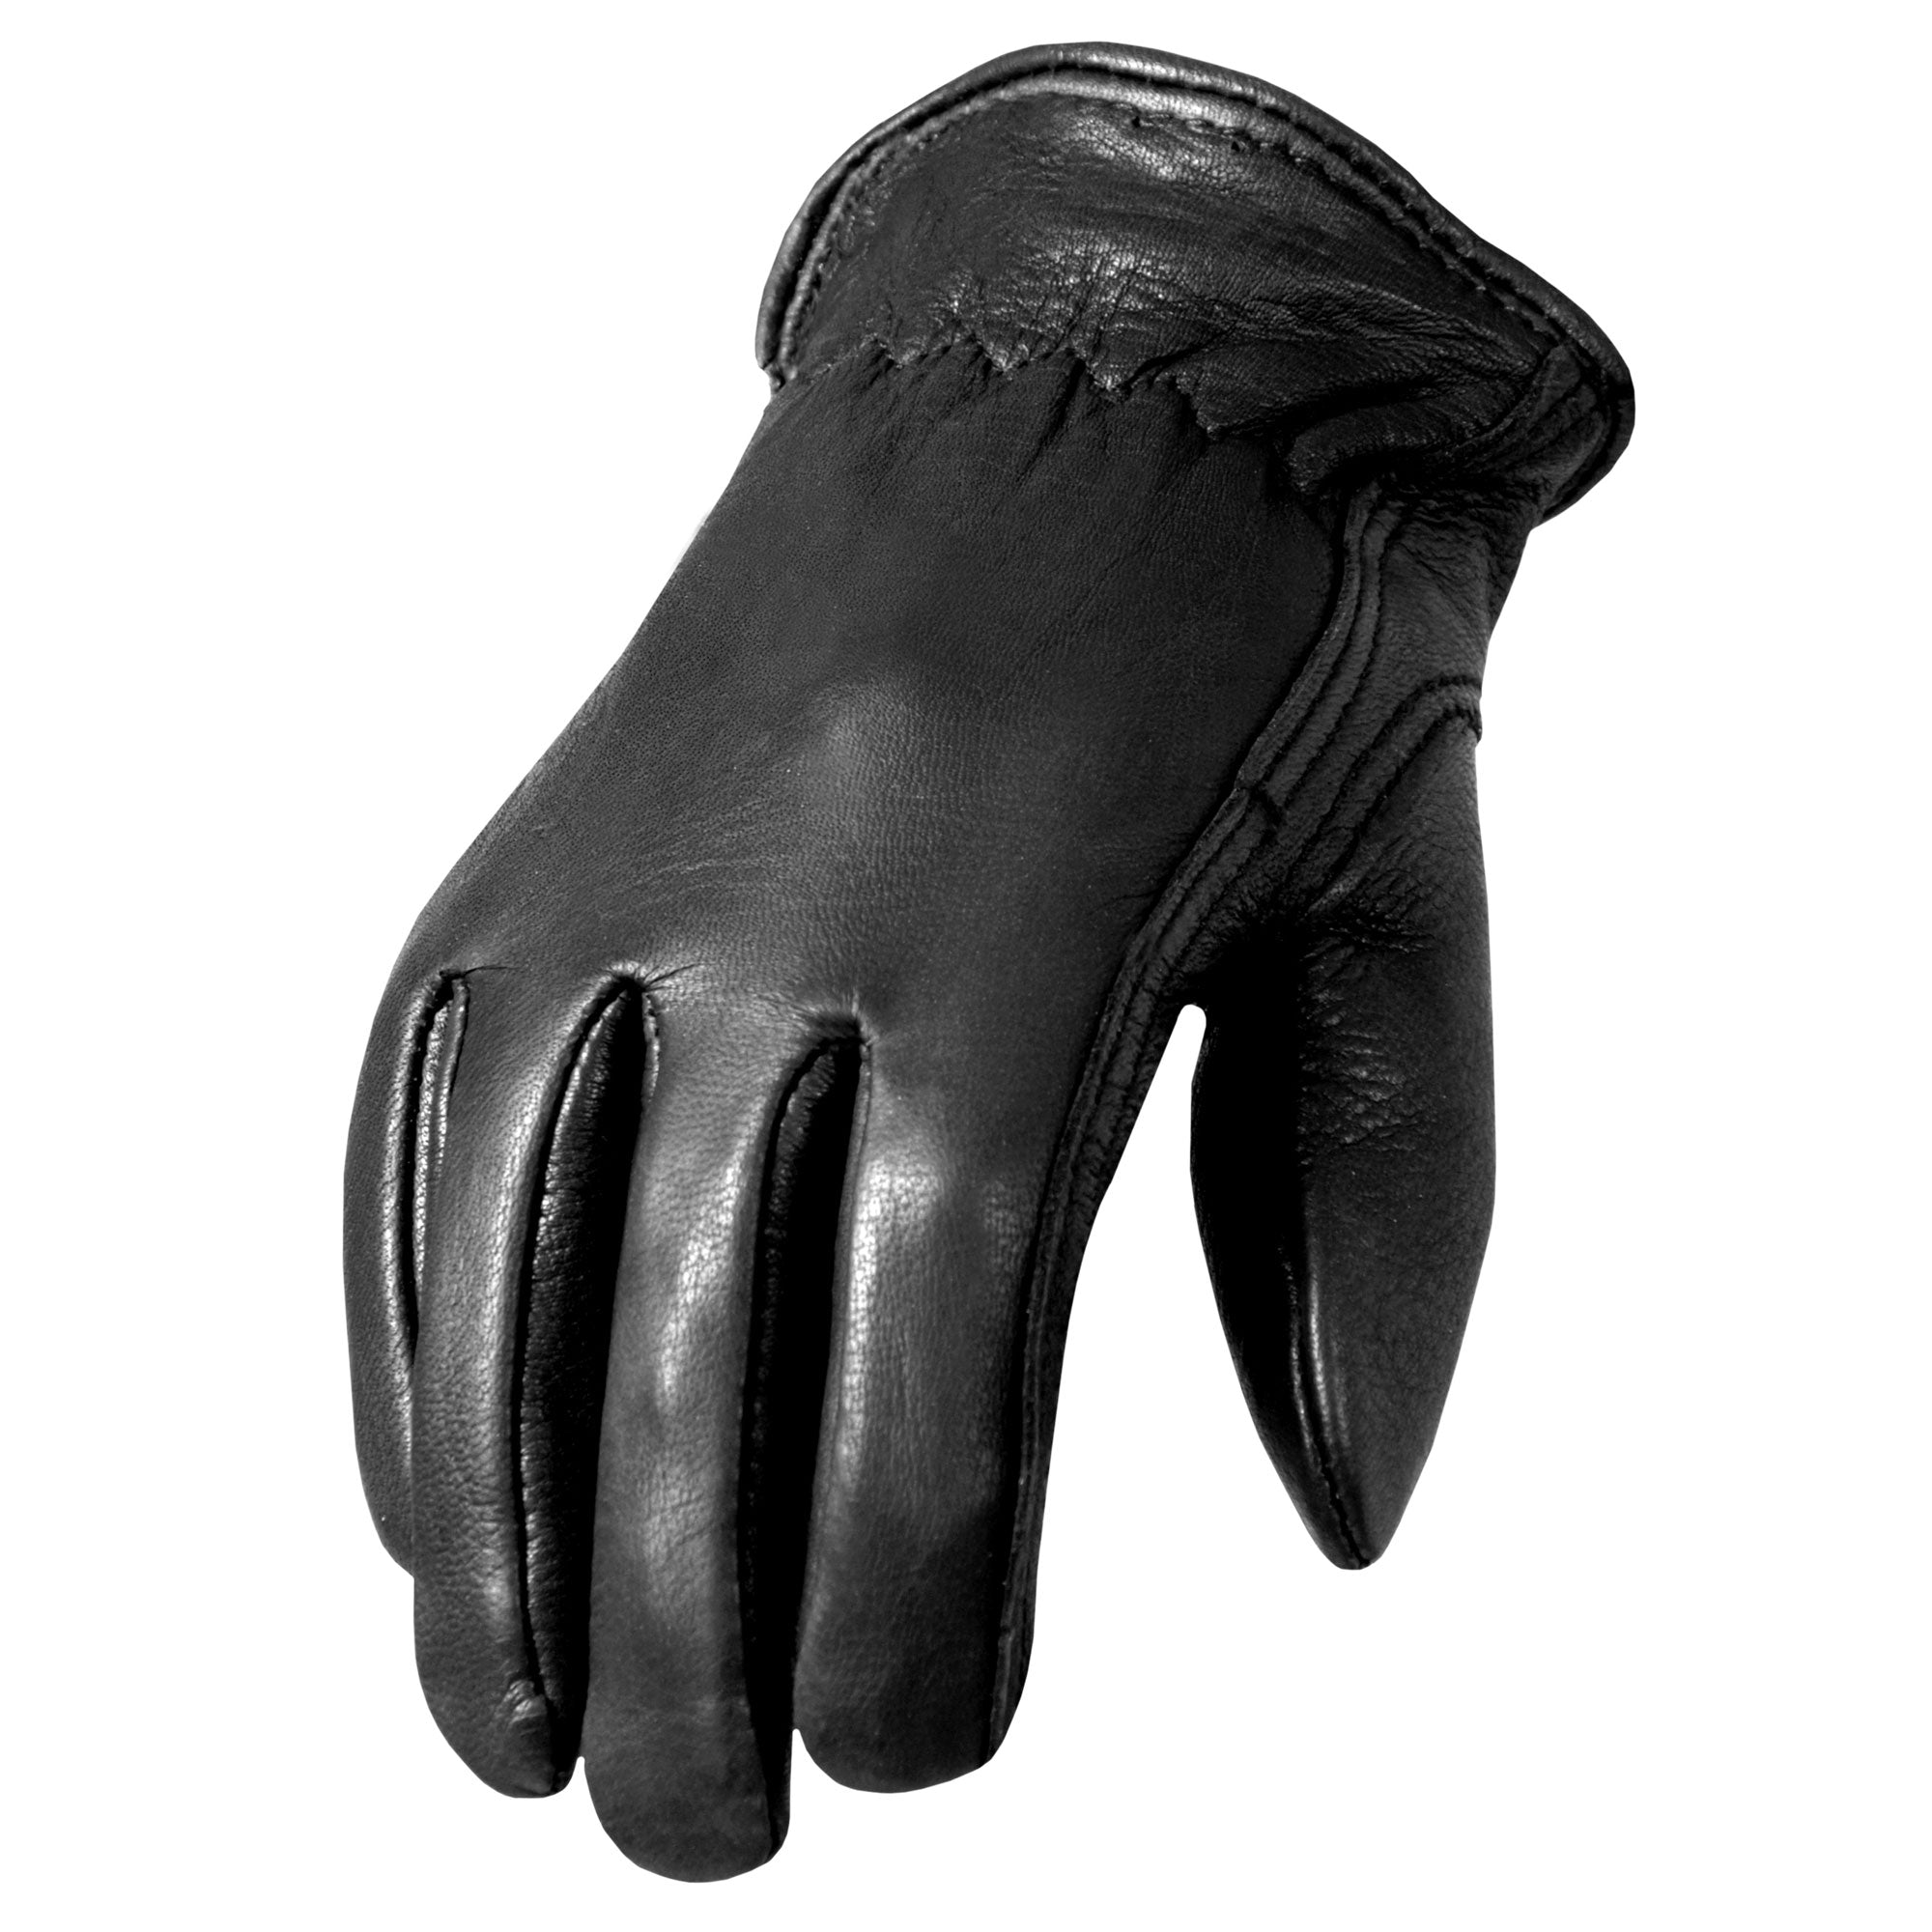 Hot Leathers GVD1001 Classic Deerskin Driving Glove